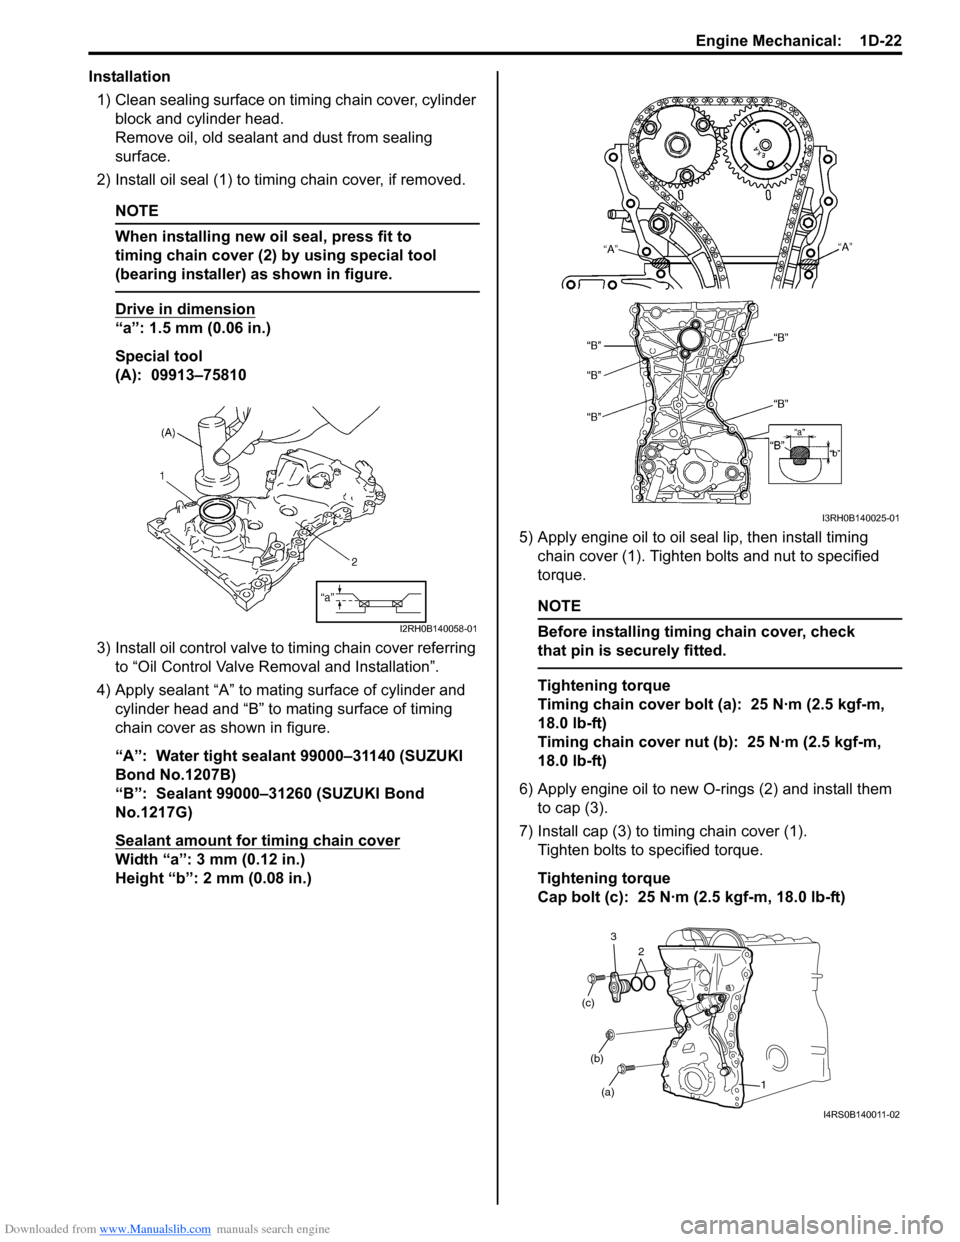 SUZUKI SWIFT 2007 2.G Service Workshop Manual Downloaded from www.Manualslib.com manuals search engine Engine Mechanical:  1D-22
Installation1) Clean sealing surface on timing chain cover, cylinder  block and cylinder head.
Remove oil, old sealan